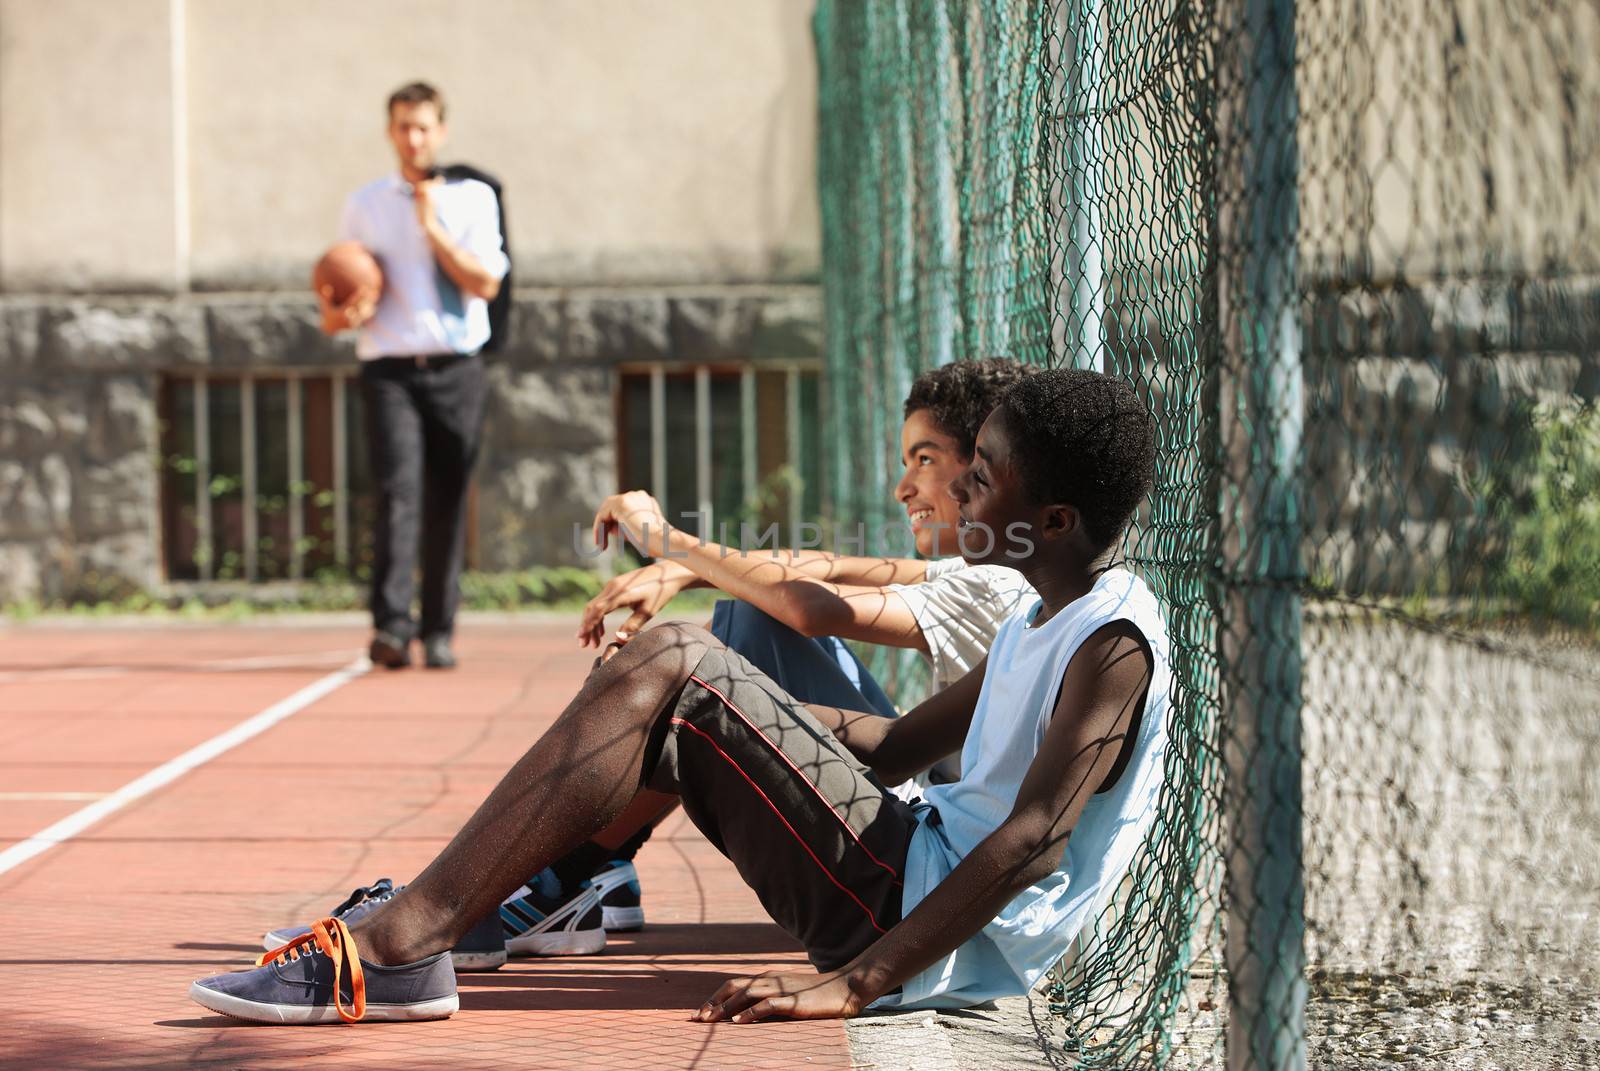 Two boys resting on basketball court young man with basketball on background